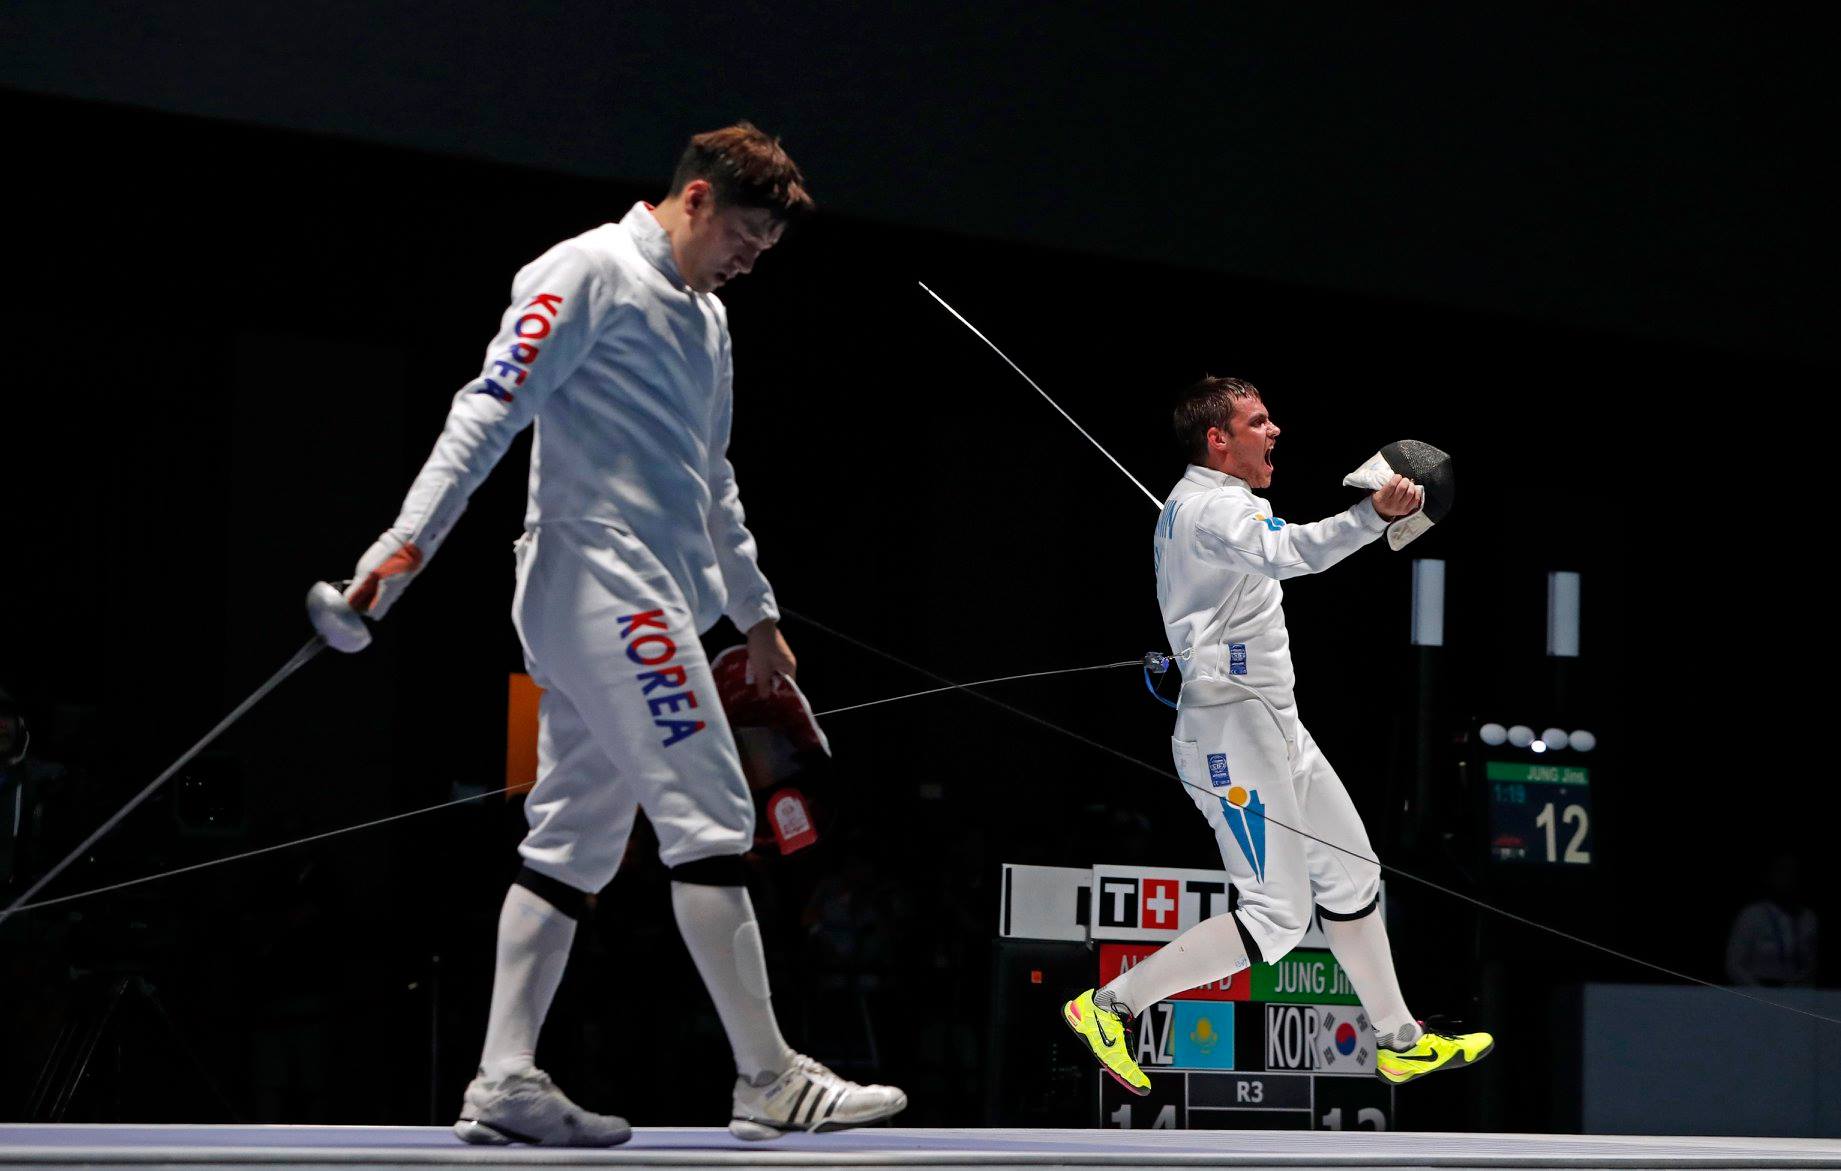 Kazakhstan's epee fencer wins gold medal at the Asian Games 2018